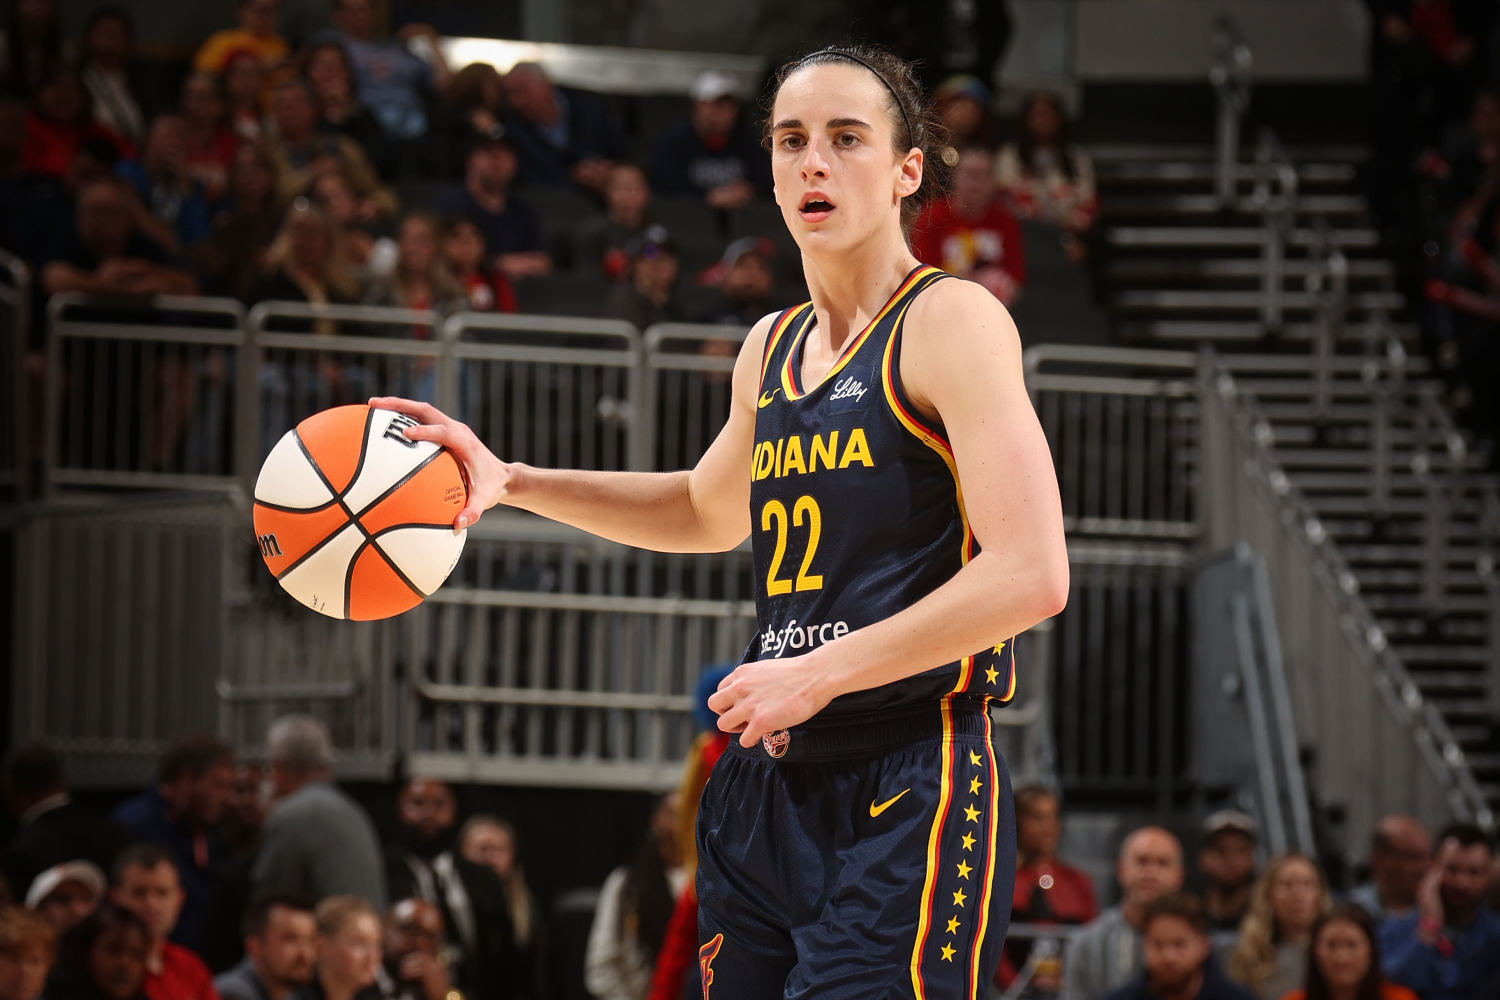 Caitlin Clark ready take the WNBA by storm: 'This is what you've worked for'